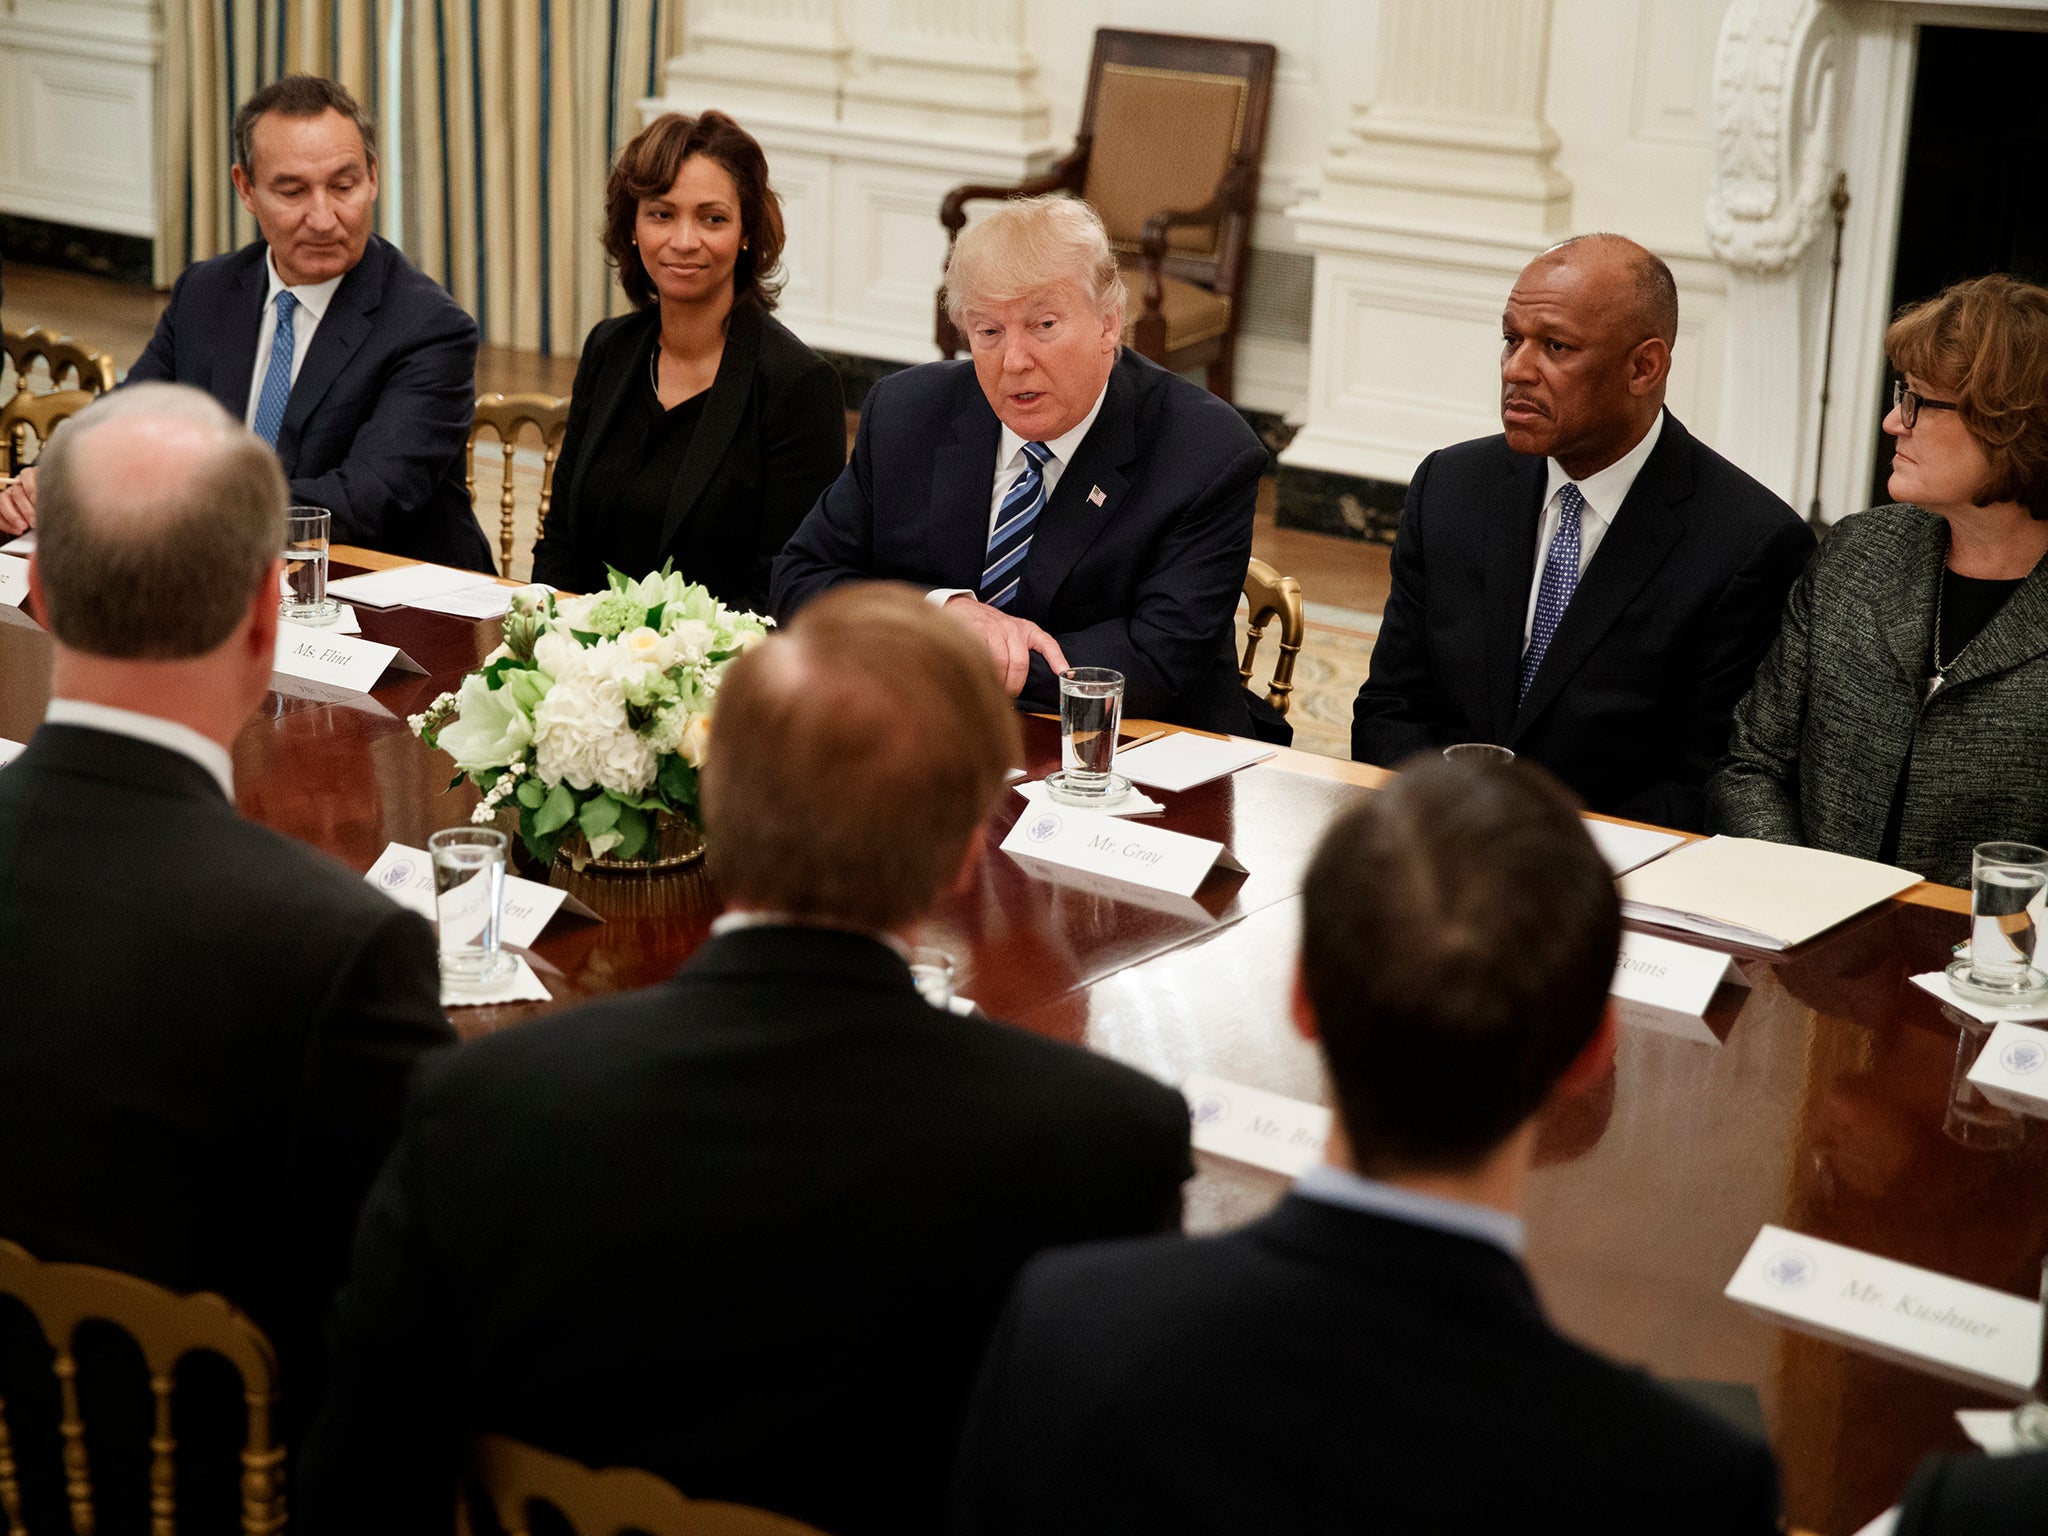 President Donald Trump speaks during a meeting with airline executives in the State Dining Room of the White House